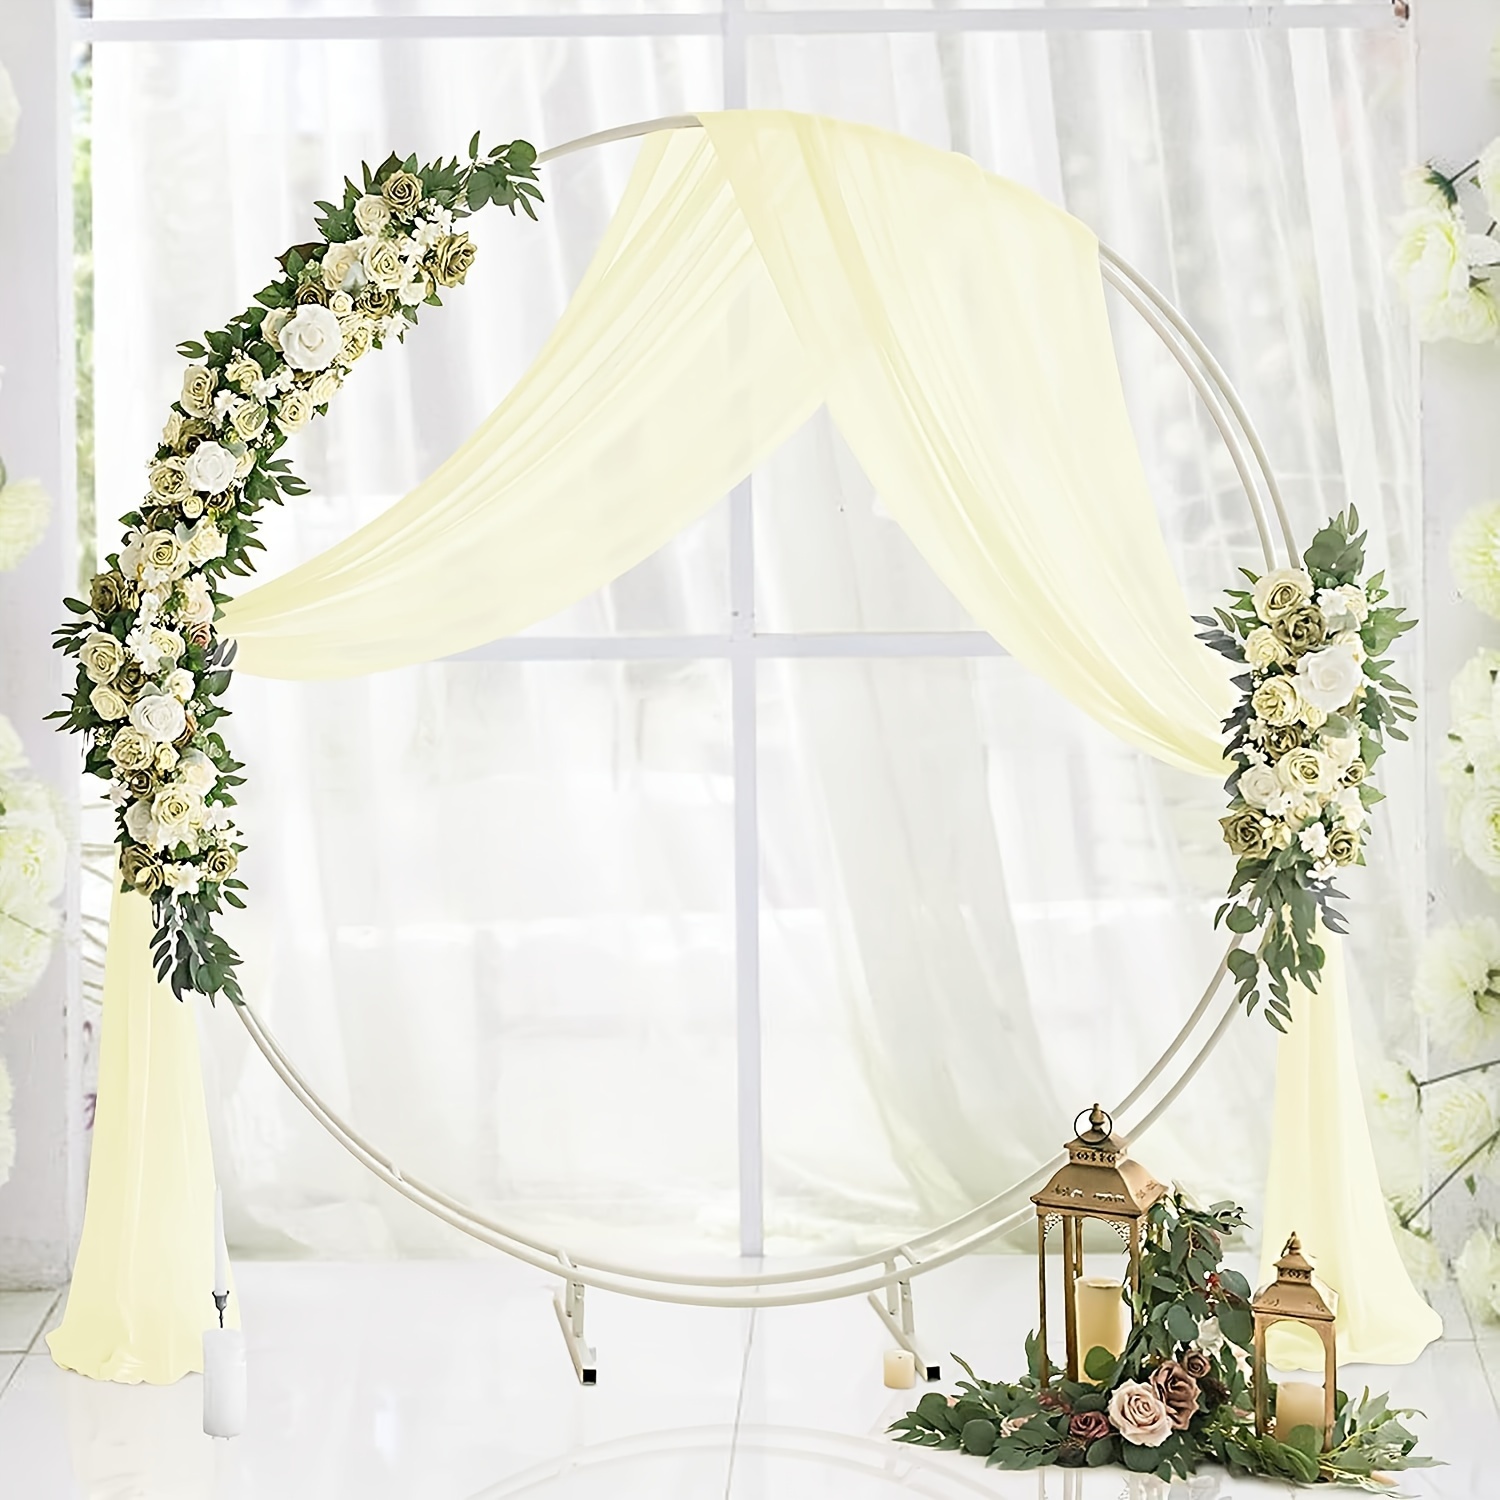 Guide Which is the Best Fabric For Wedding Arch Draping